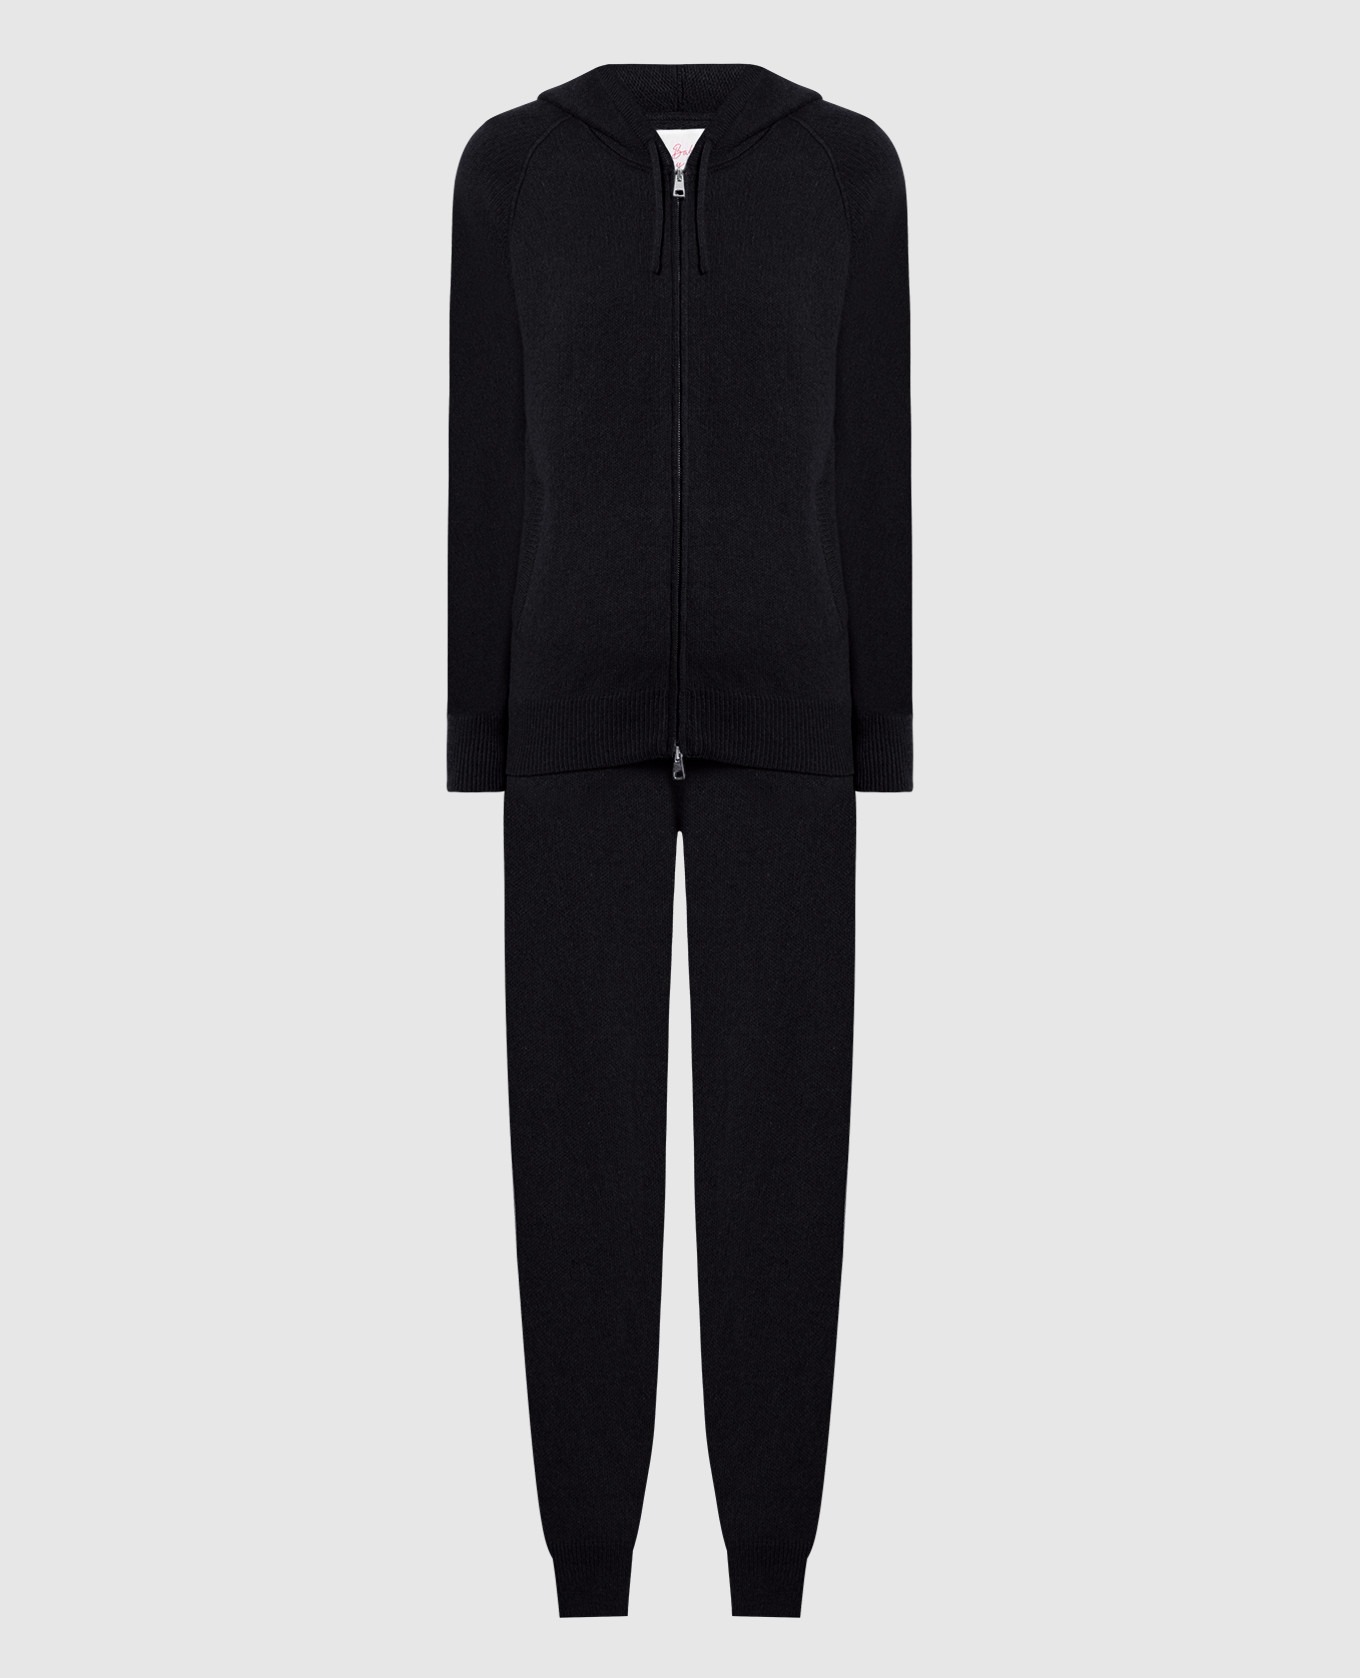 Black sports suit made of cashmere